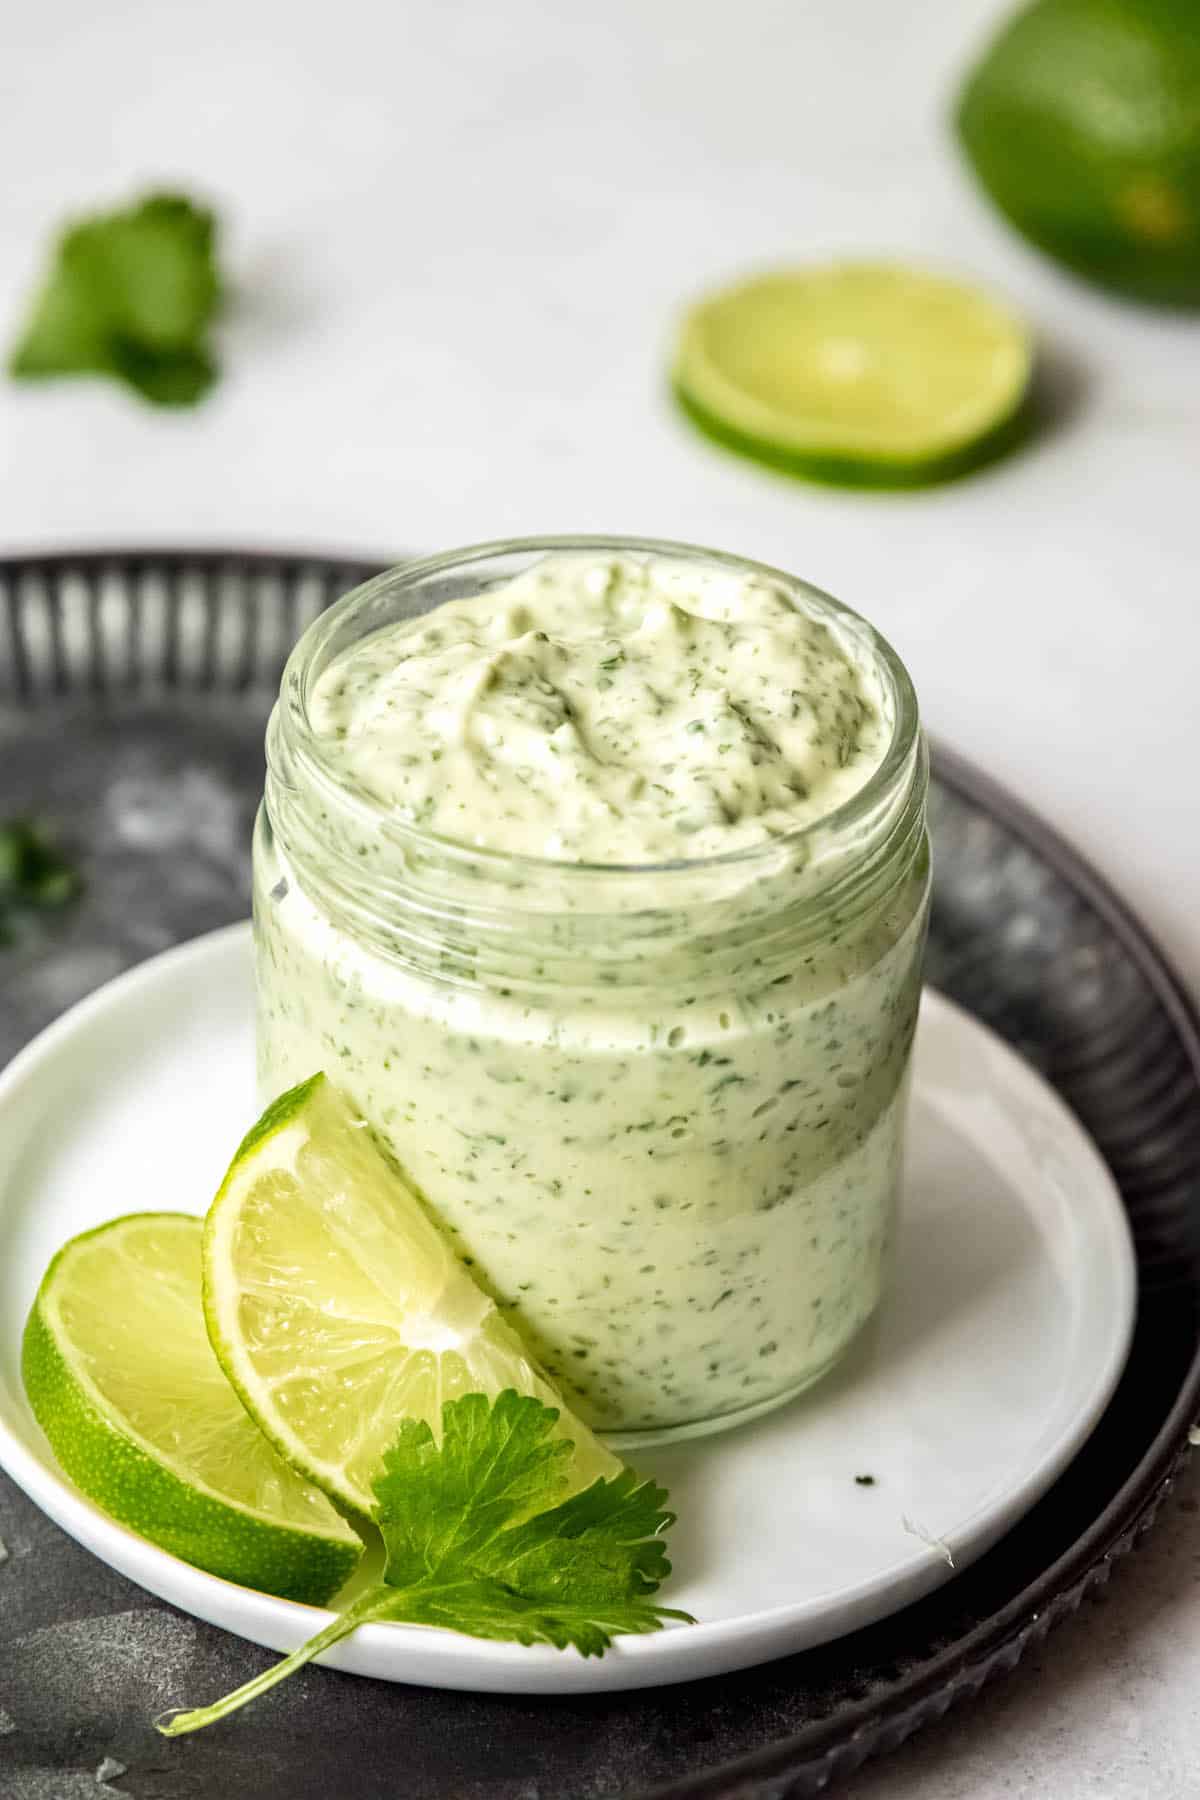 pounded black serving tray topped with a small white plate holding a jar of creamy jalapeno cilantro sauce with sliced limes and a sprig of cilantro.